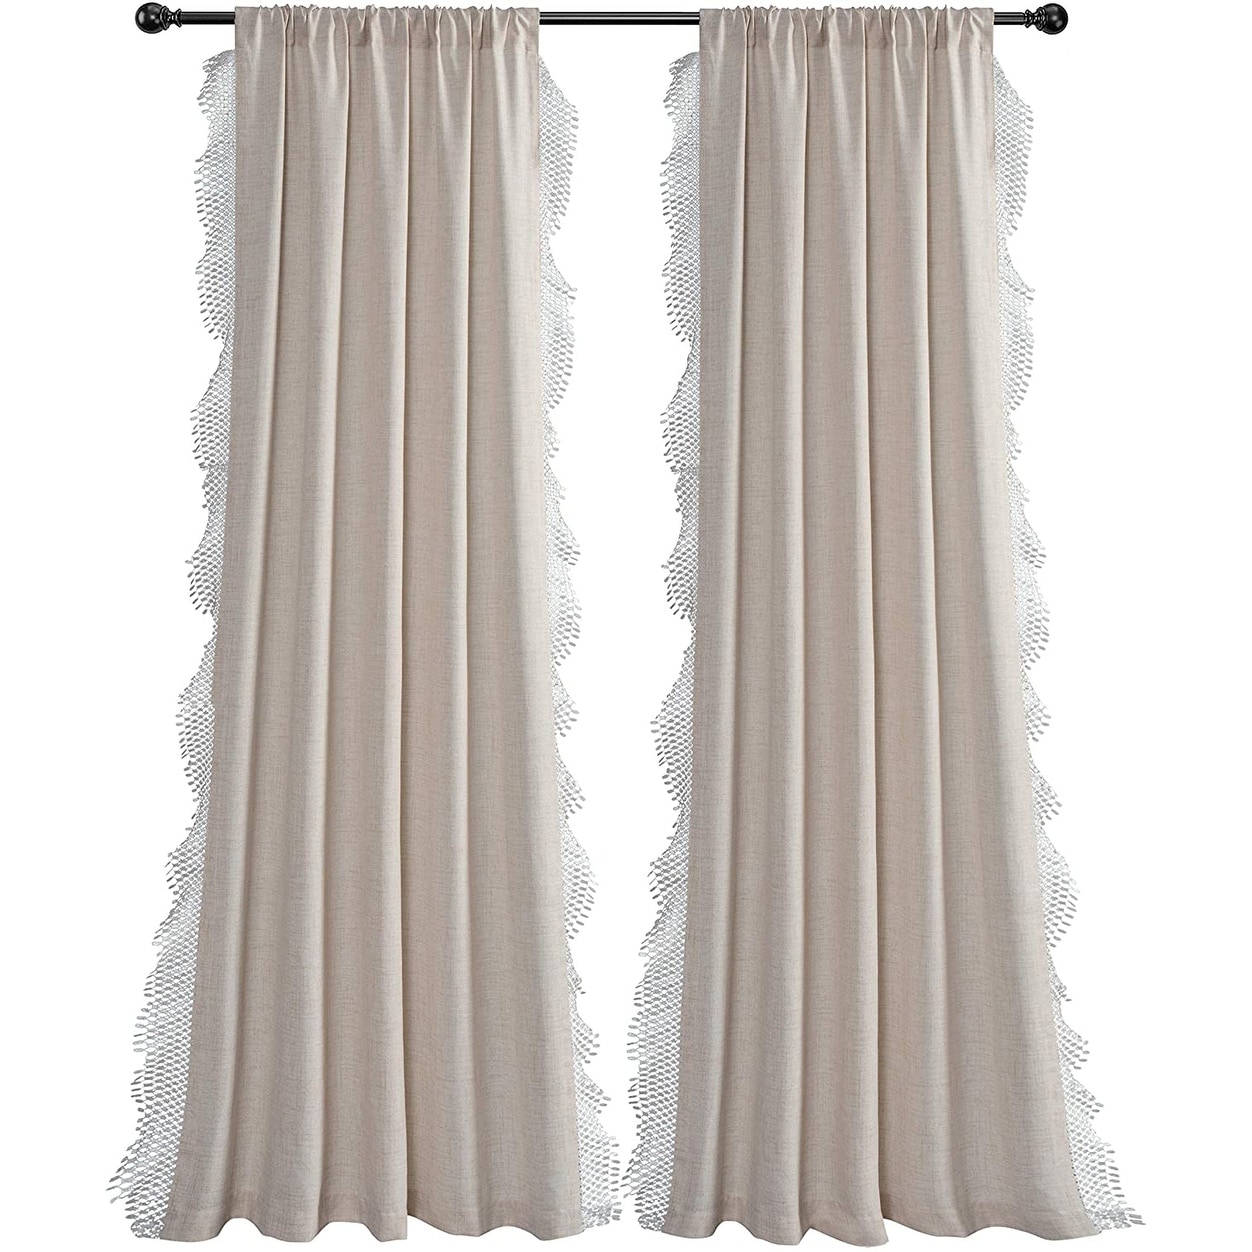 2 Piece Exclusive Home Curtains Woodland Printed Metallic Branch Sheer Textured Linen Window Curtain Panel Pair with Grommet Top Winter Gold 54x84